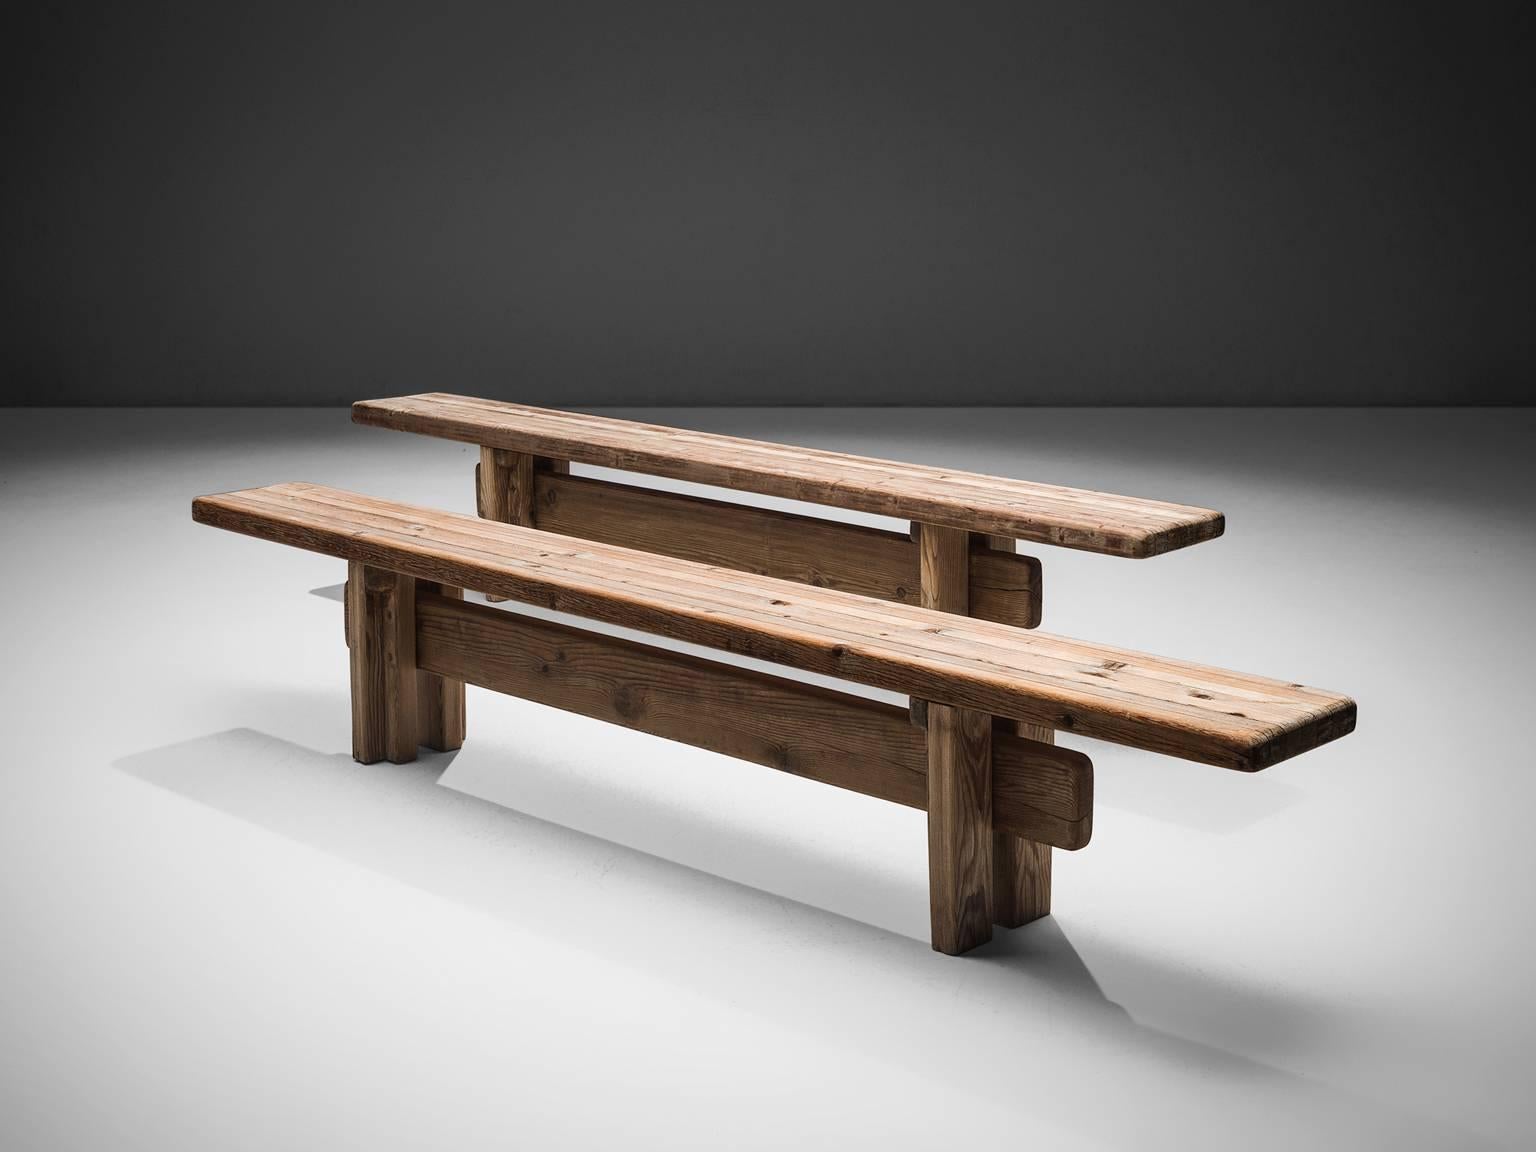 Set of two pine benches, France, circa 1950. 

These pine wooden benches are robust and architectural in their design. The bulky benches are made of beautiful pine wood which developed a nice, rustic patina from age and use. The traditional wooden